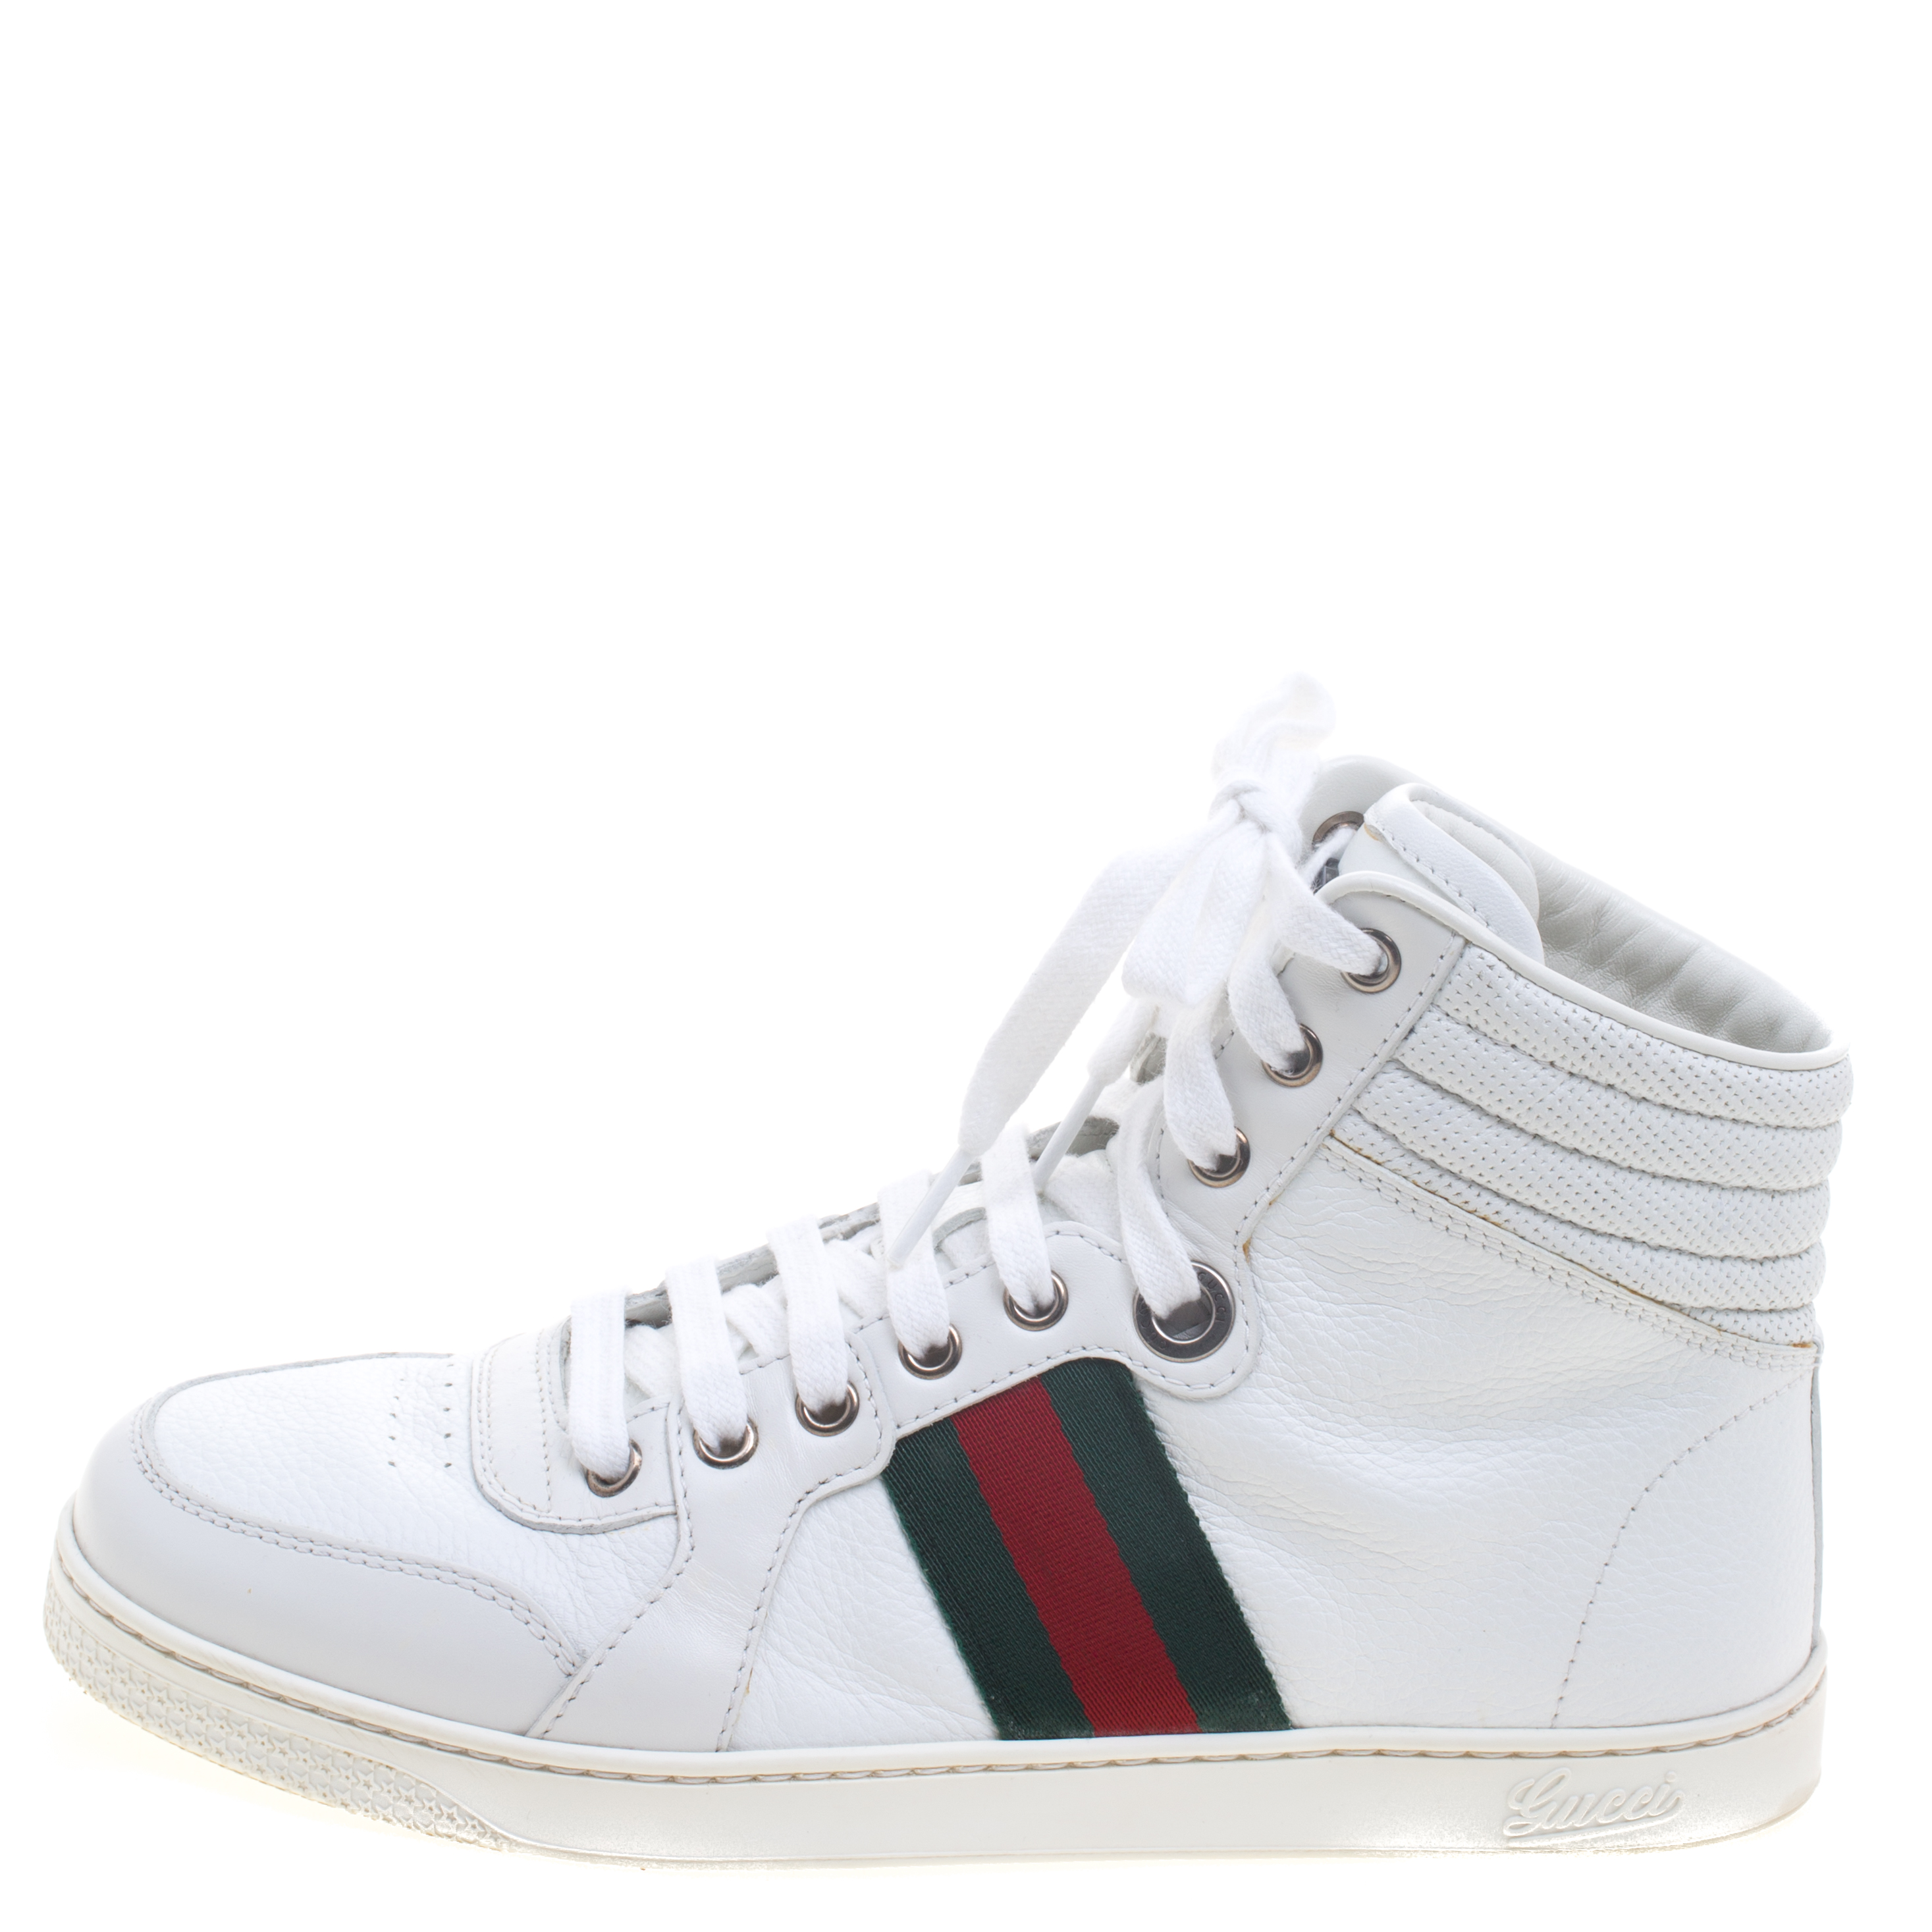 GUCCI men's white leather web signature hi-top sneakers | Size 6/US 8 (10.4  in)